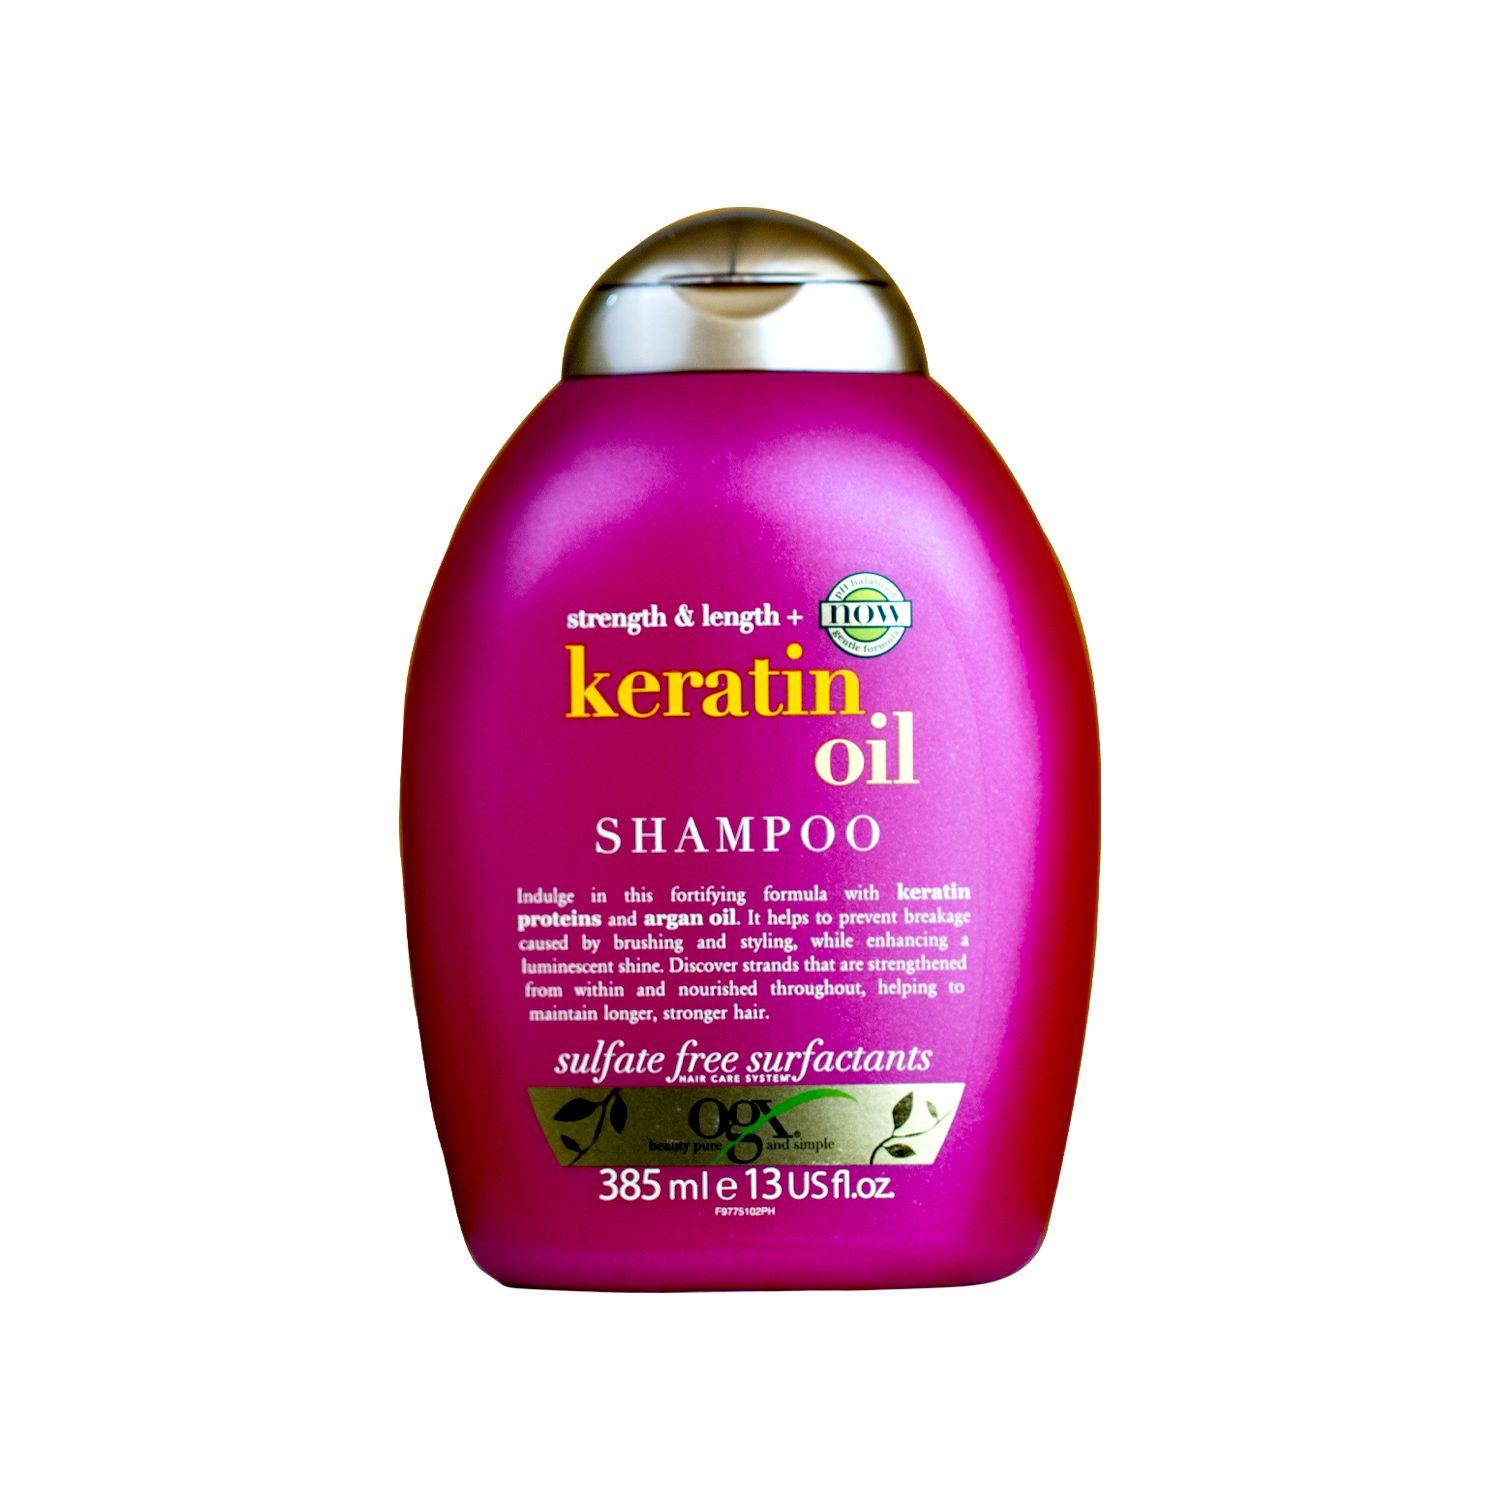 This wash works hard to help defend against split ends and rid your mane of pesky broken pieces. Keratin Oil Shampoo helps to fortify each strand with strength, because stronger hair can grow longer and more beautiful.